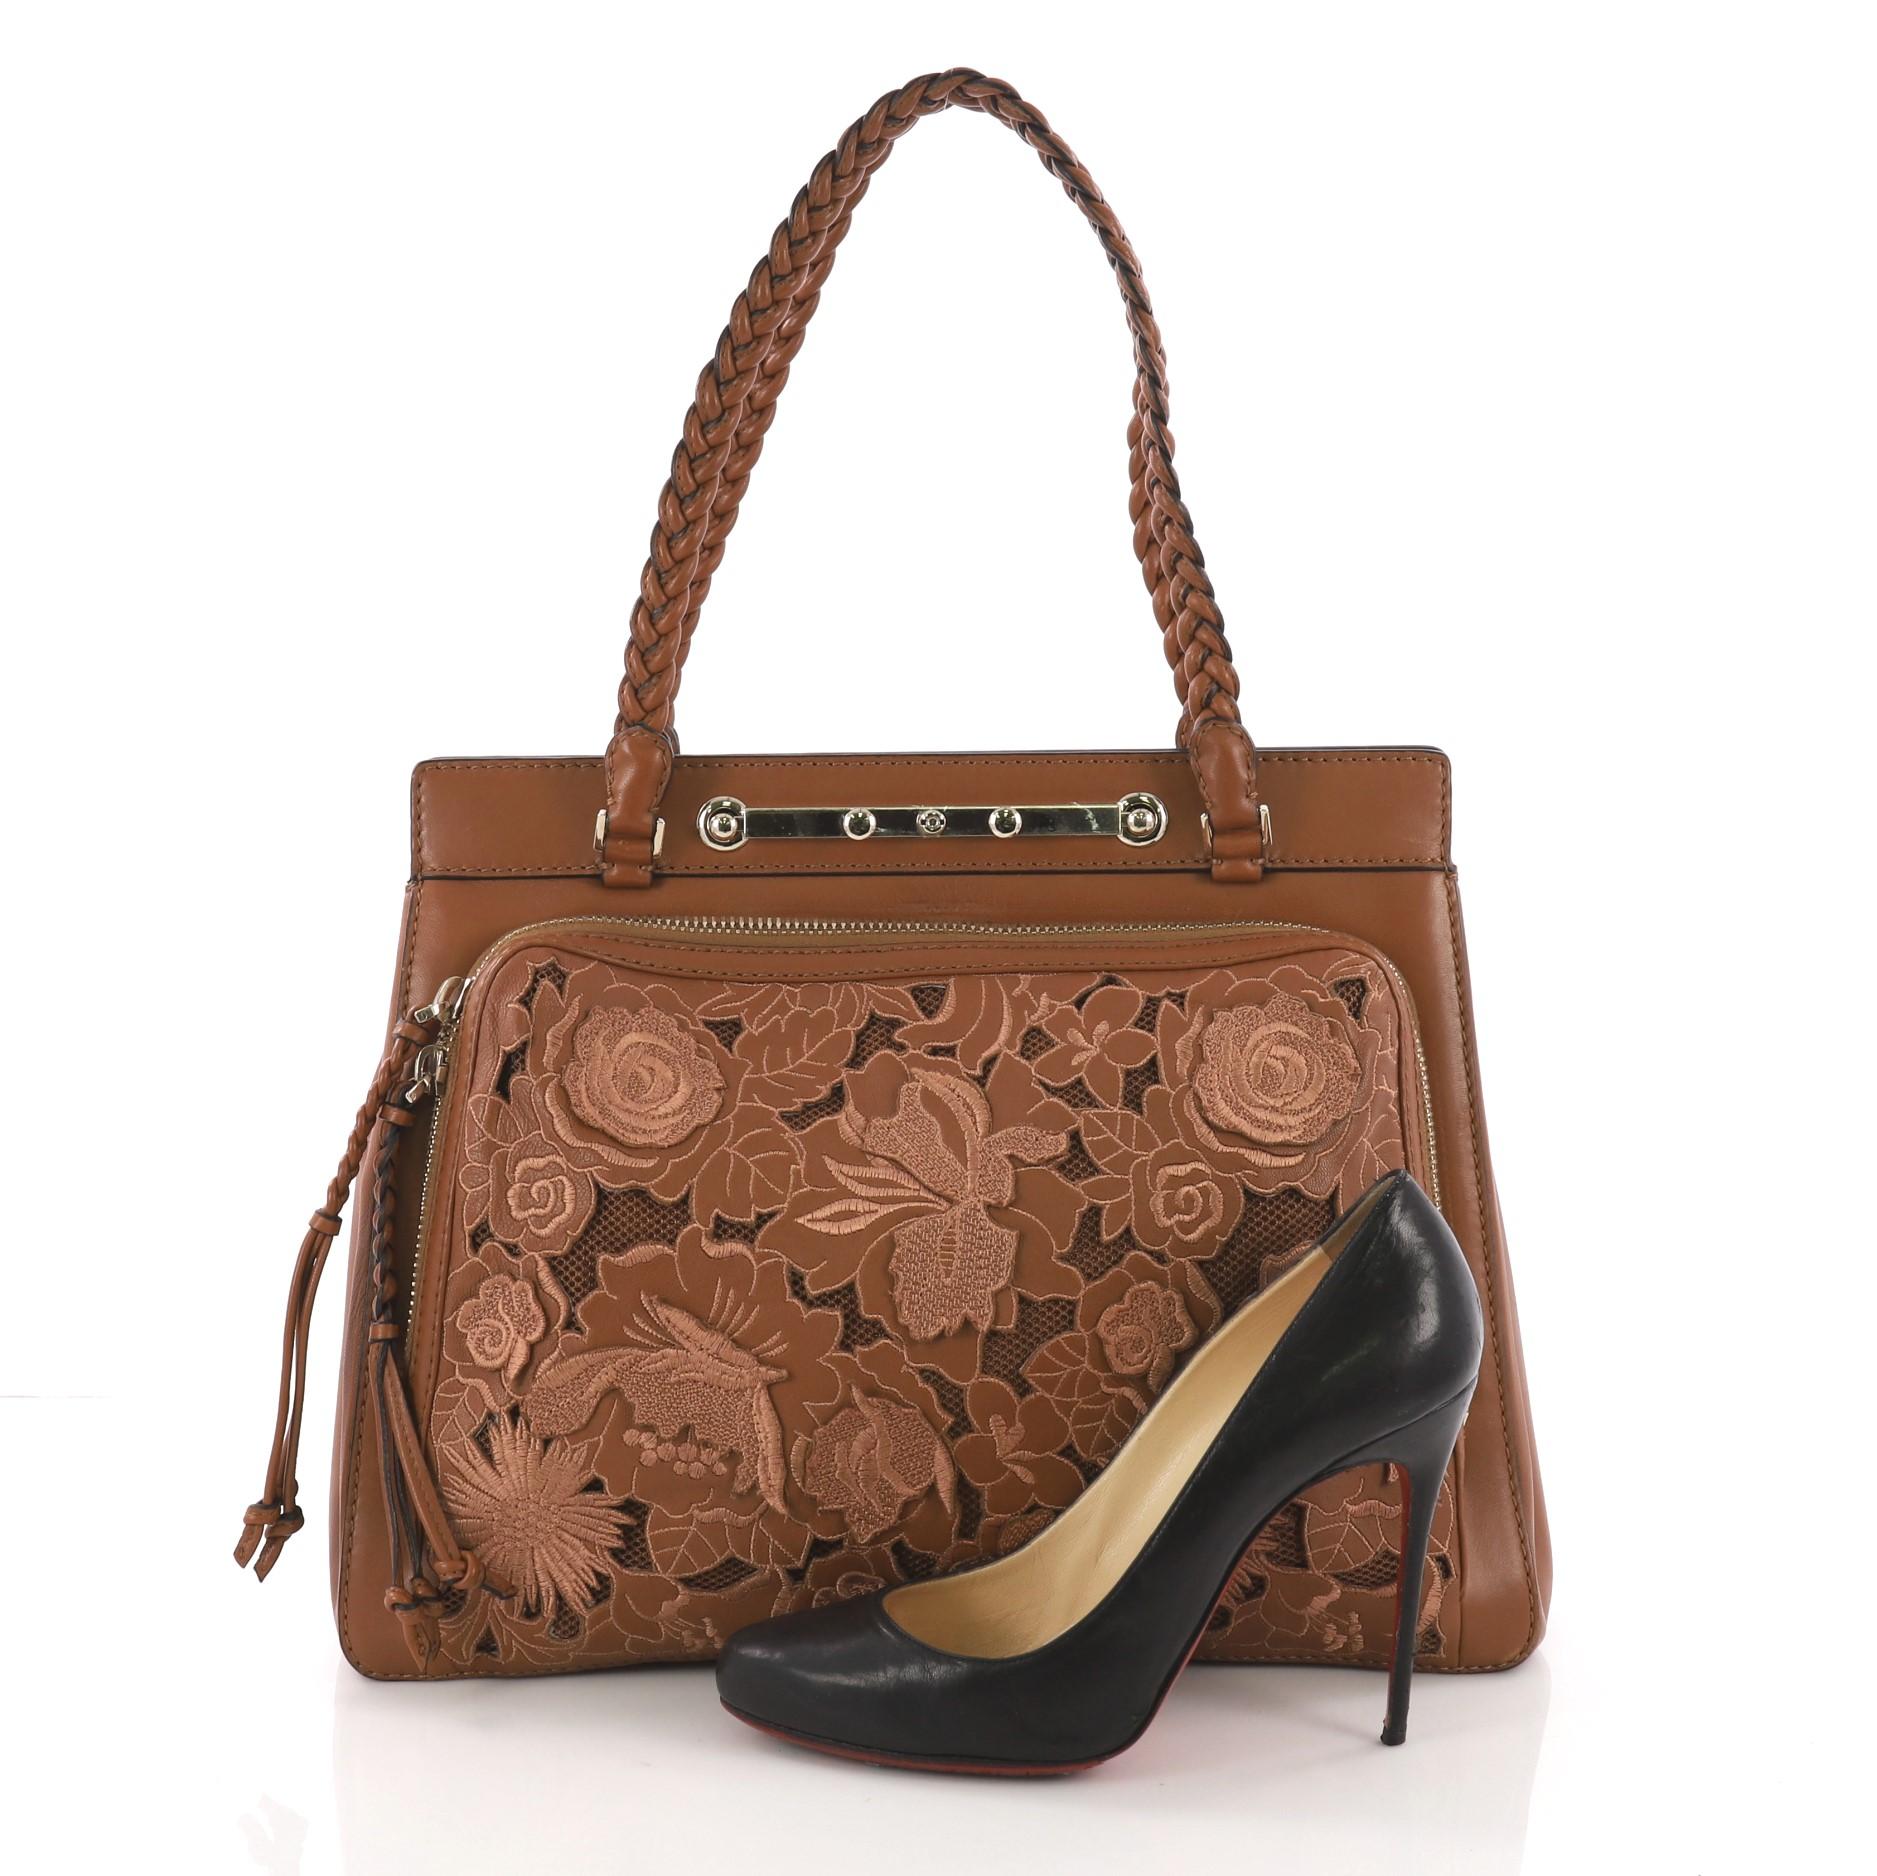 This Valentino Demetra Tote Leather Lace, crafted in brown leather, features braided leather straps, a large front zip-around pocket with braided zipper pulls and cutwork lace front panel, protective base feet and gold-tone hardware. Its push-lock